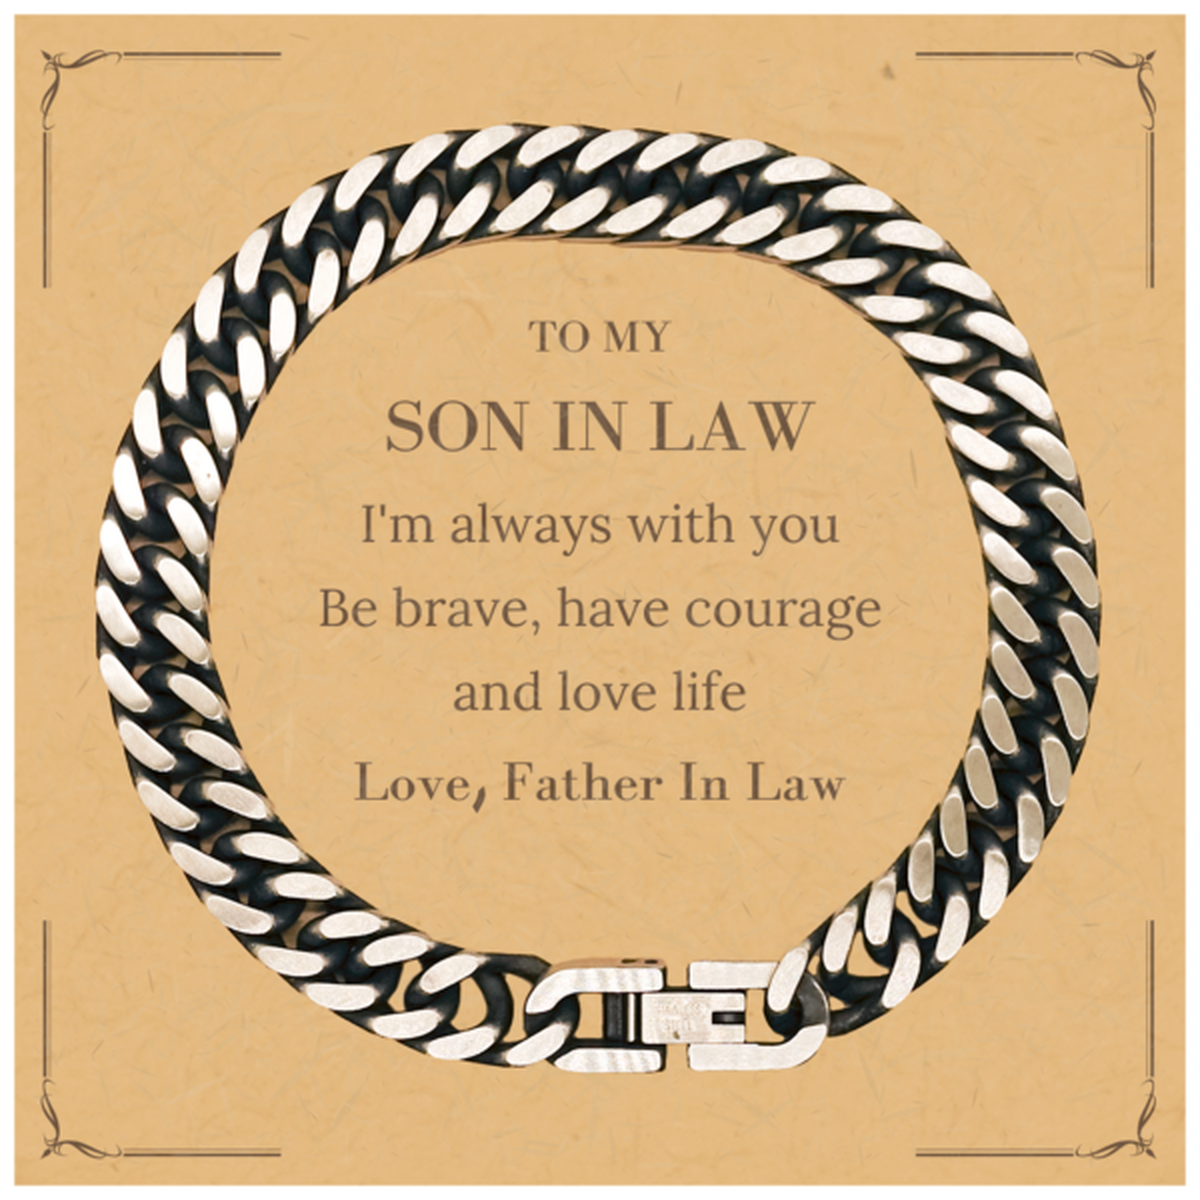 To My Son In Law Gifts from Father In Law, Unique Cuban Link Chain Bracelet Inspirational Christmas Birthday Graduation Gifts for Son In Law I'm always with you. Be brave, have courage and love life. Love, Father In Law